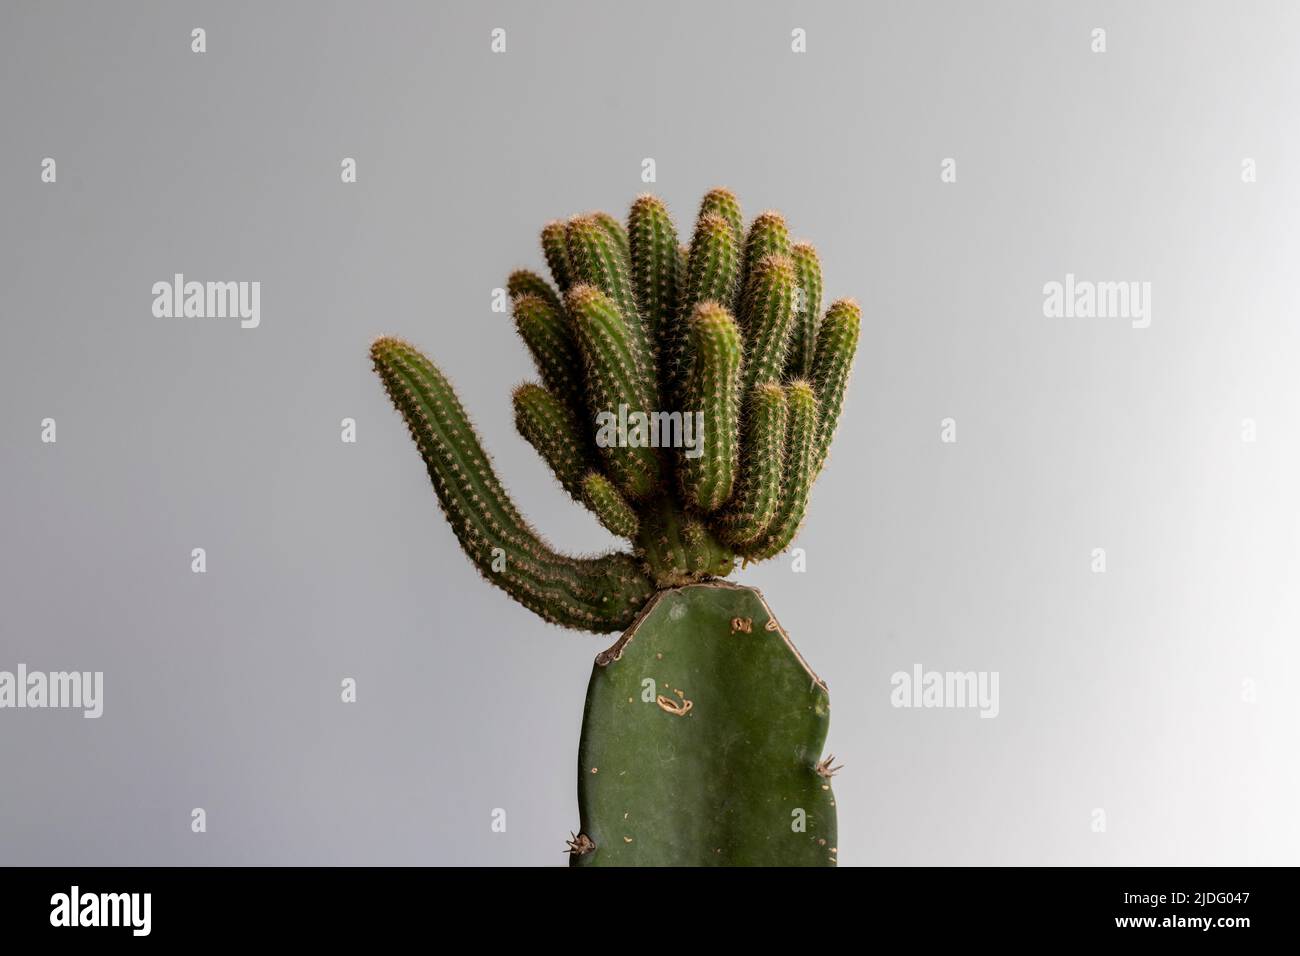 grafted cactus head closeup view Stock Photo